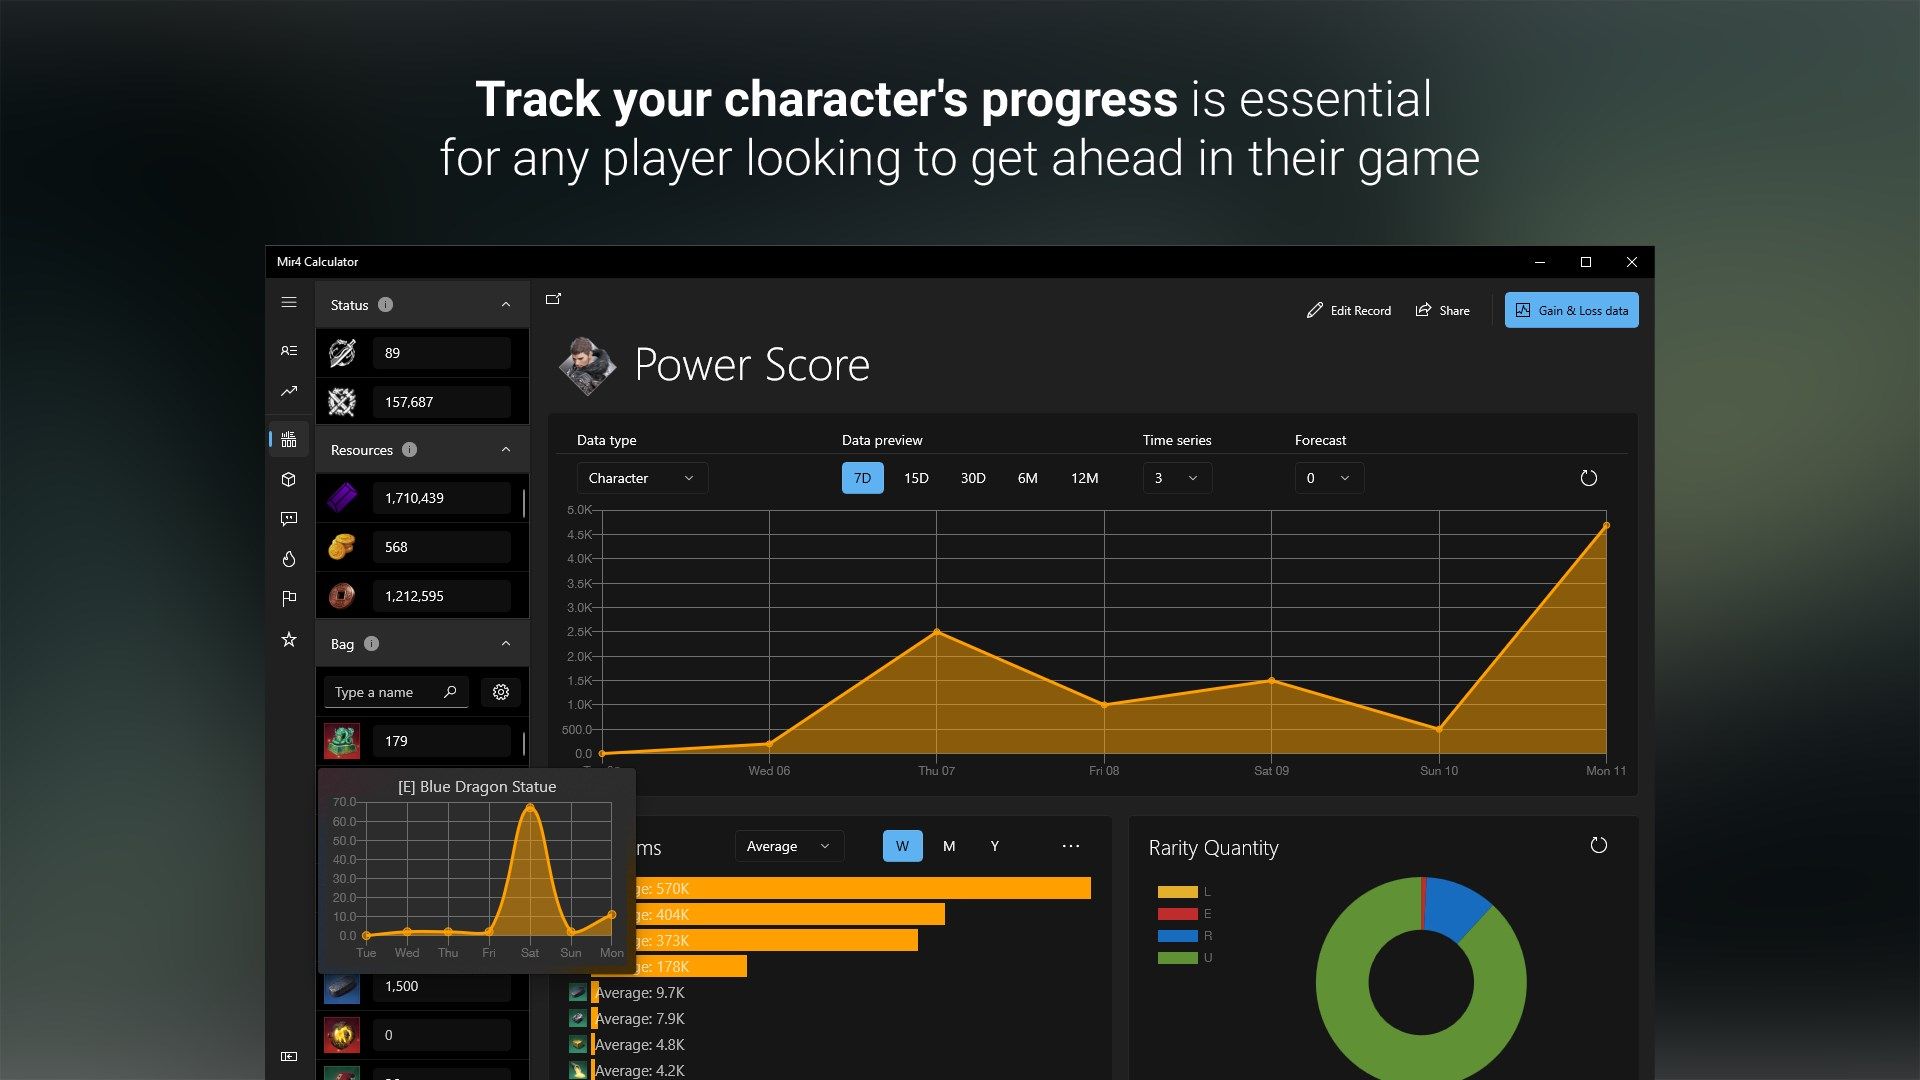 Mir4 Calculator | Track your character's progress is essential for any player looking to get ahead in their game